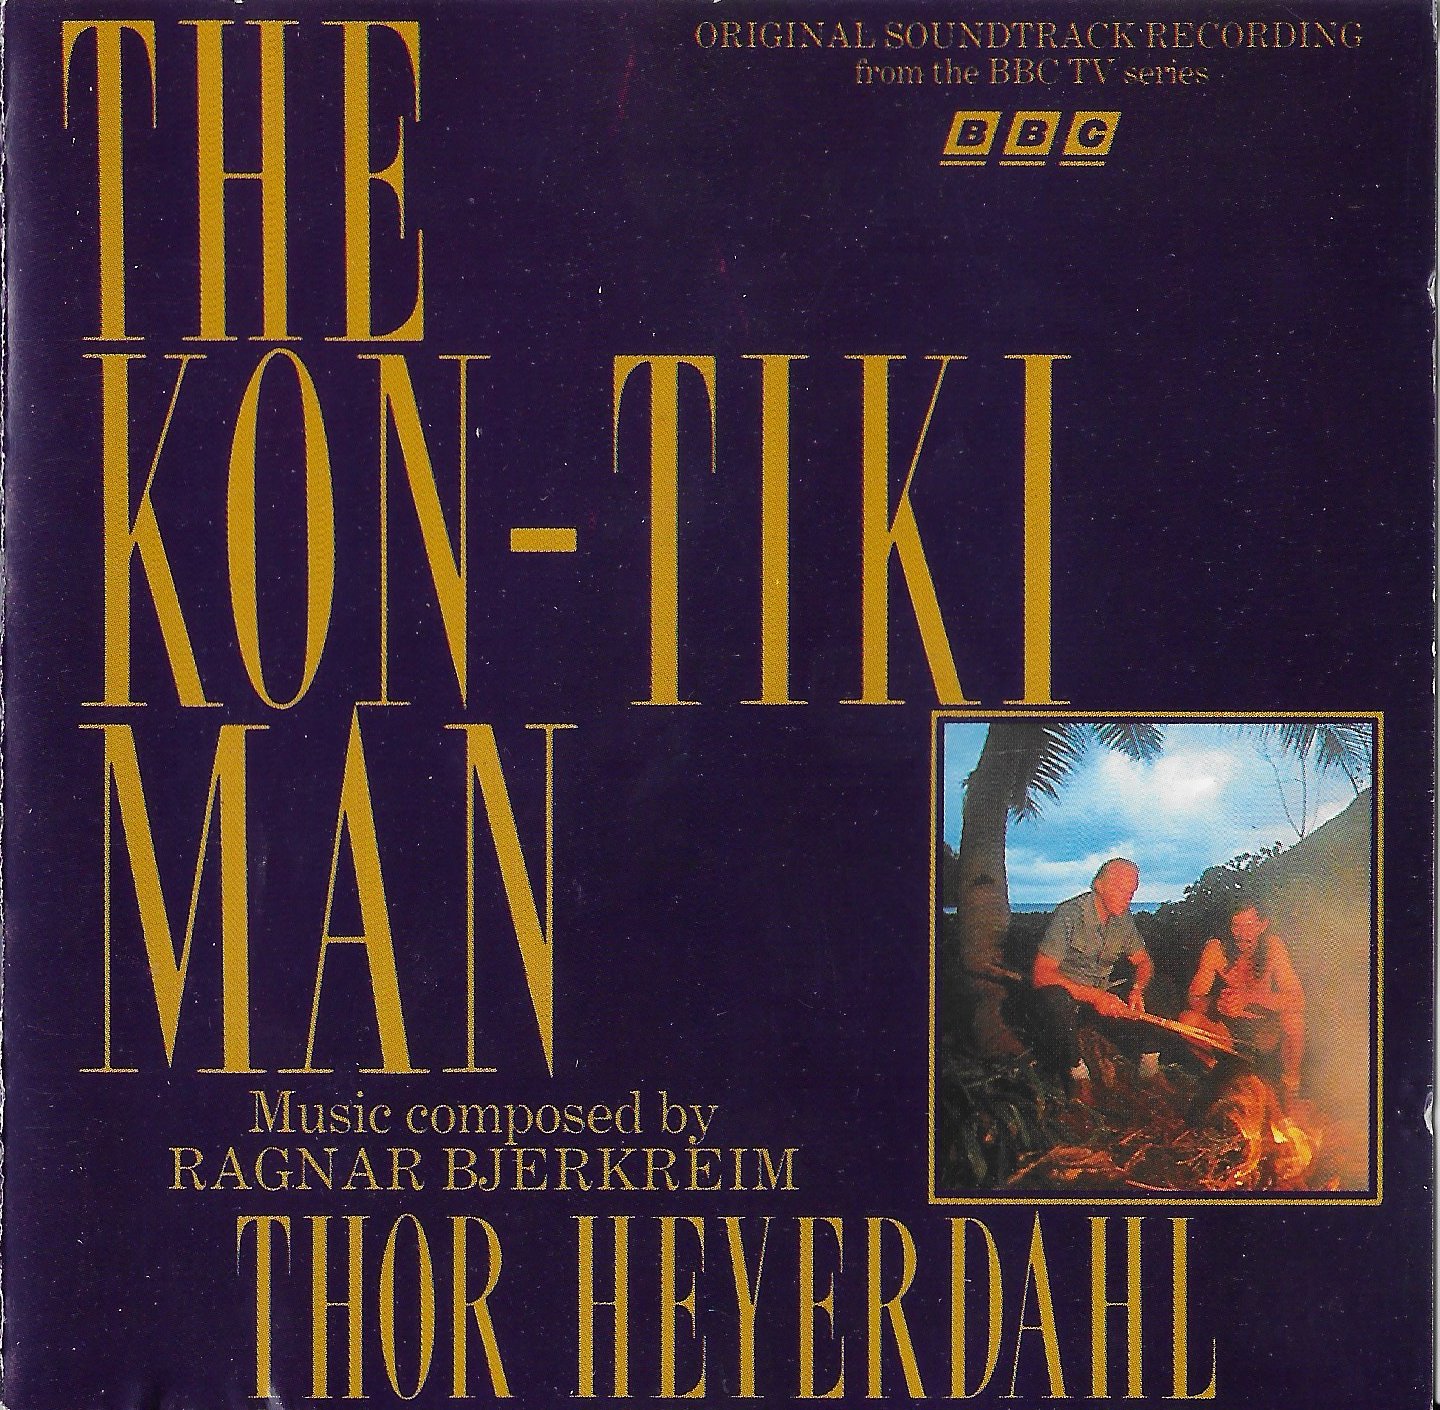 Picture of The Kon-Tiki man by artist Ragnar Bjerkreim from the BBC cds - Records and Tapes library